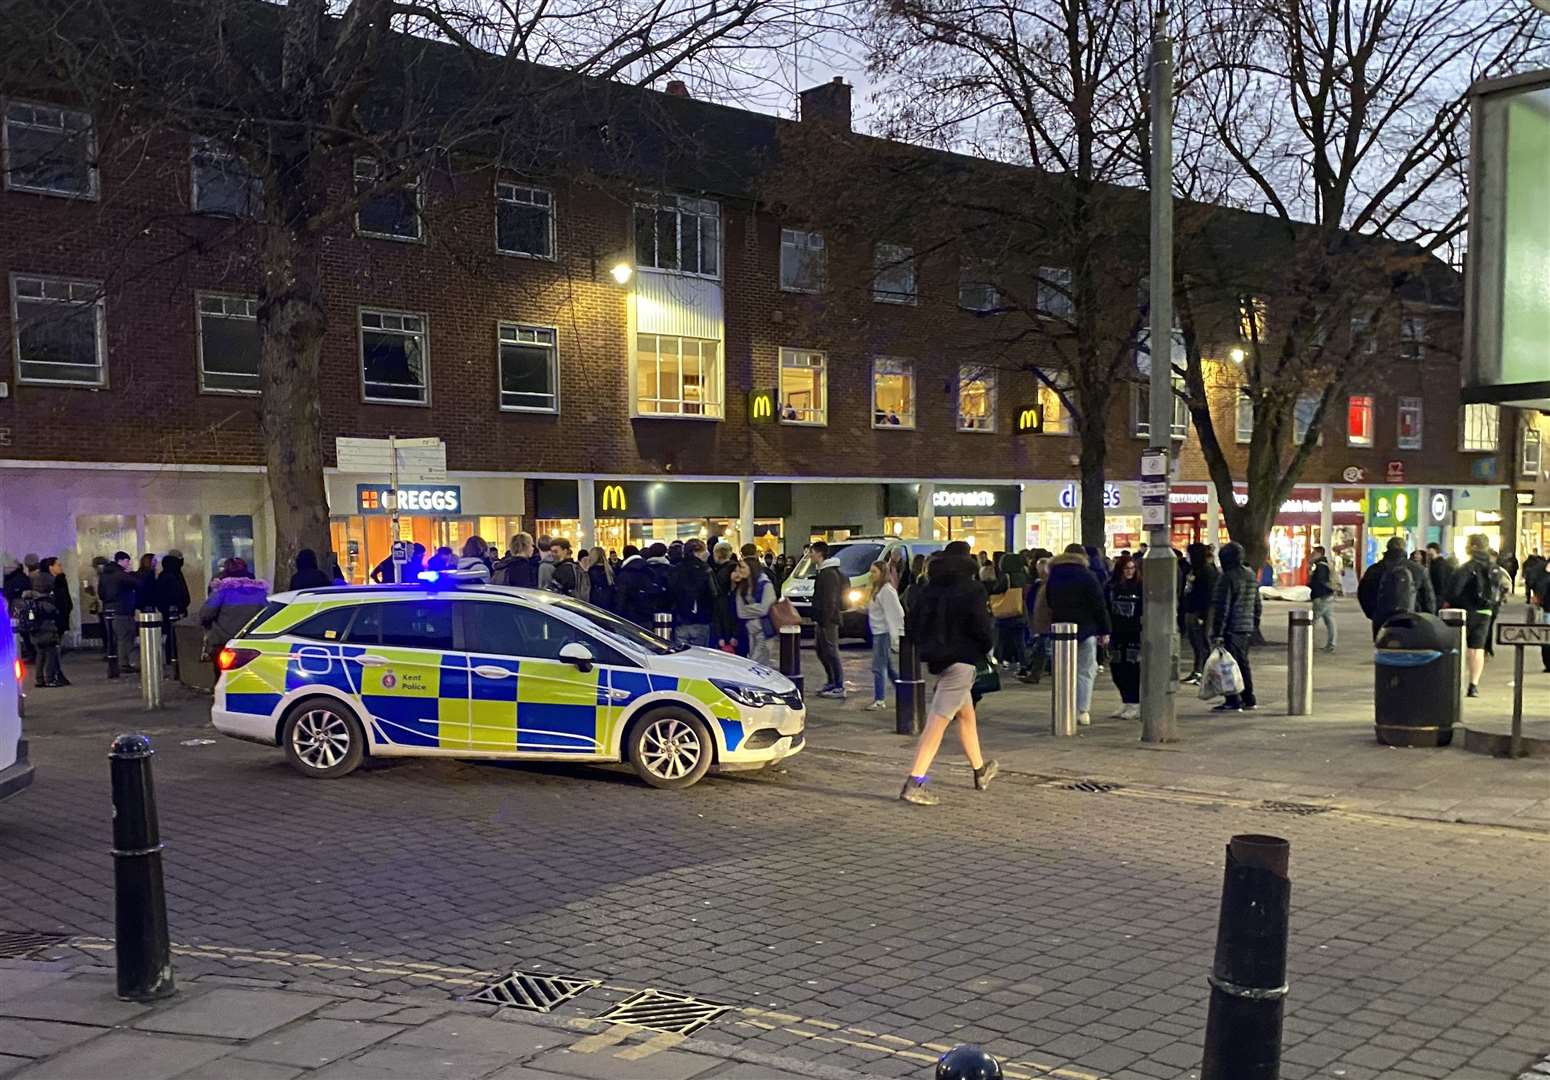 A police presence in Canterbury city centre on January 20, when an officer was assaulted while responding to reports of teenagers causing a nuisance